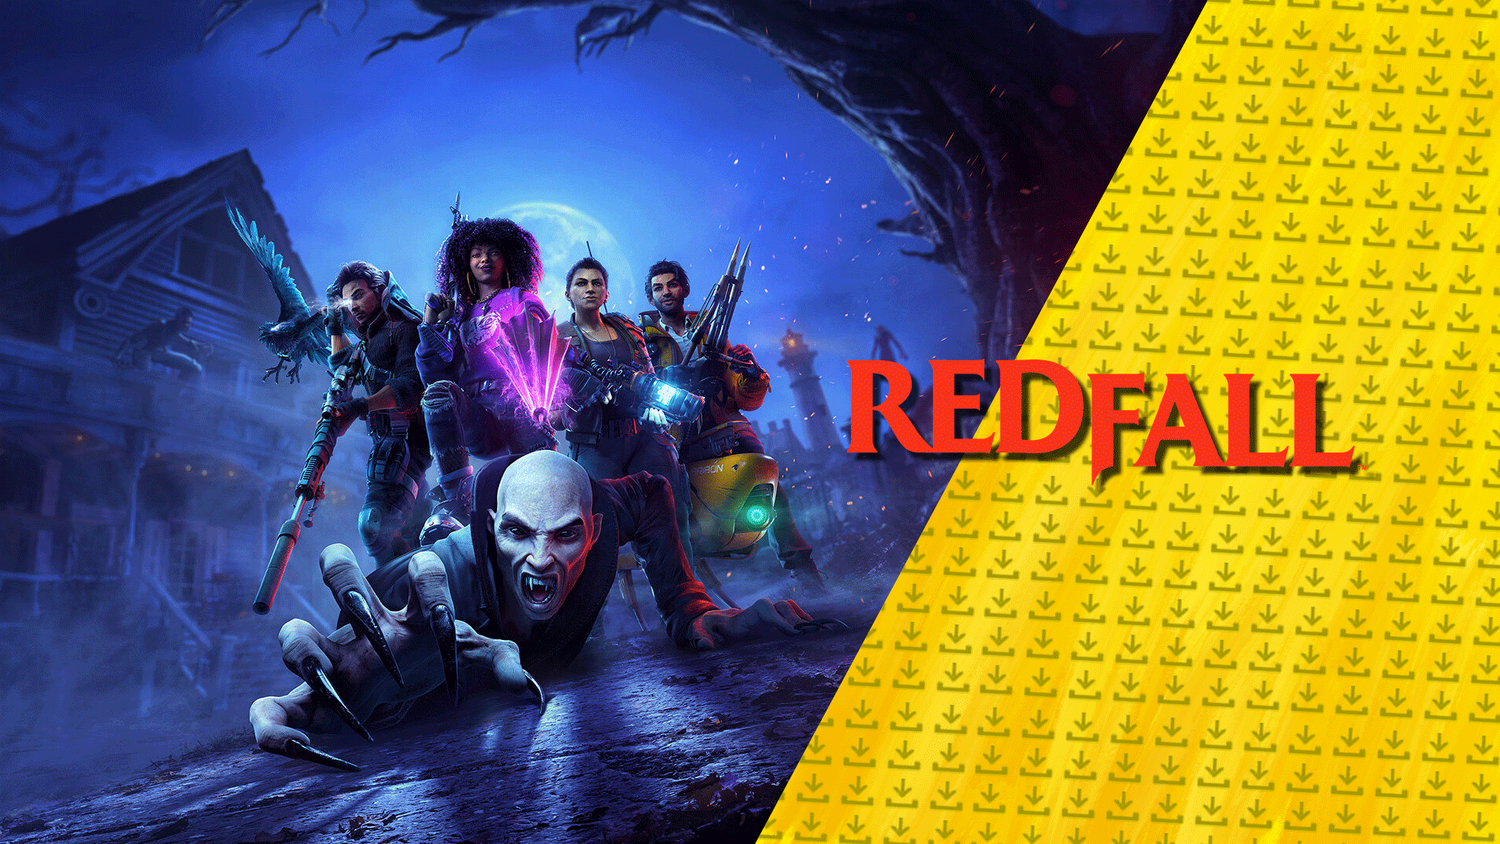 Redfall Update 3 brings a UV sniper, AI fixes, performance boosts, and more  - Neowin